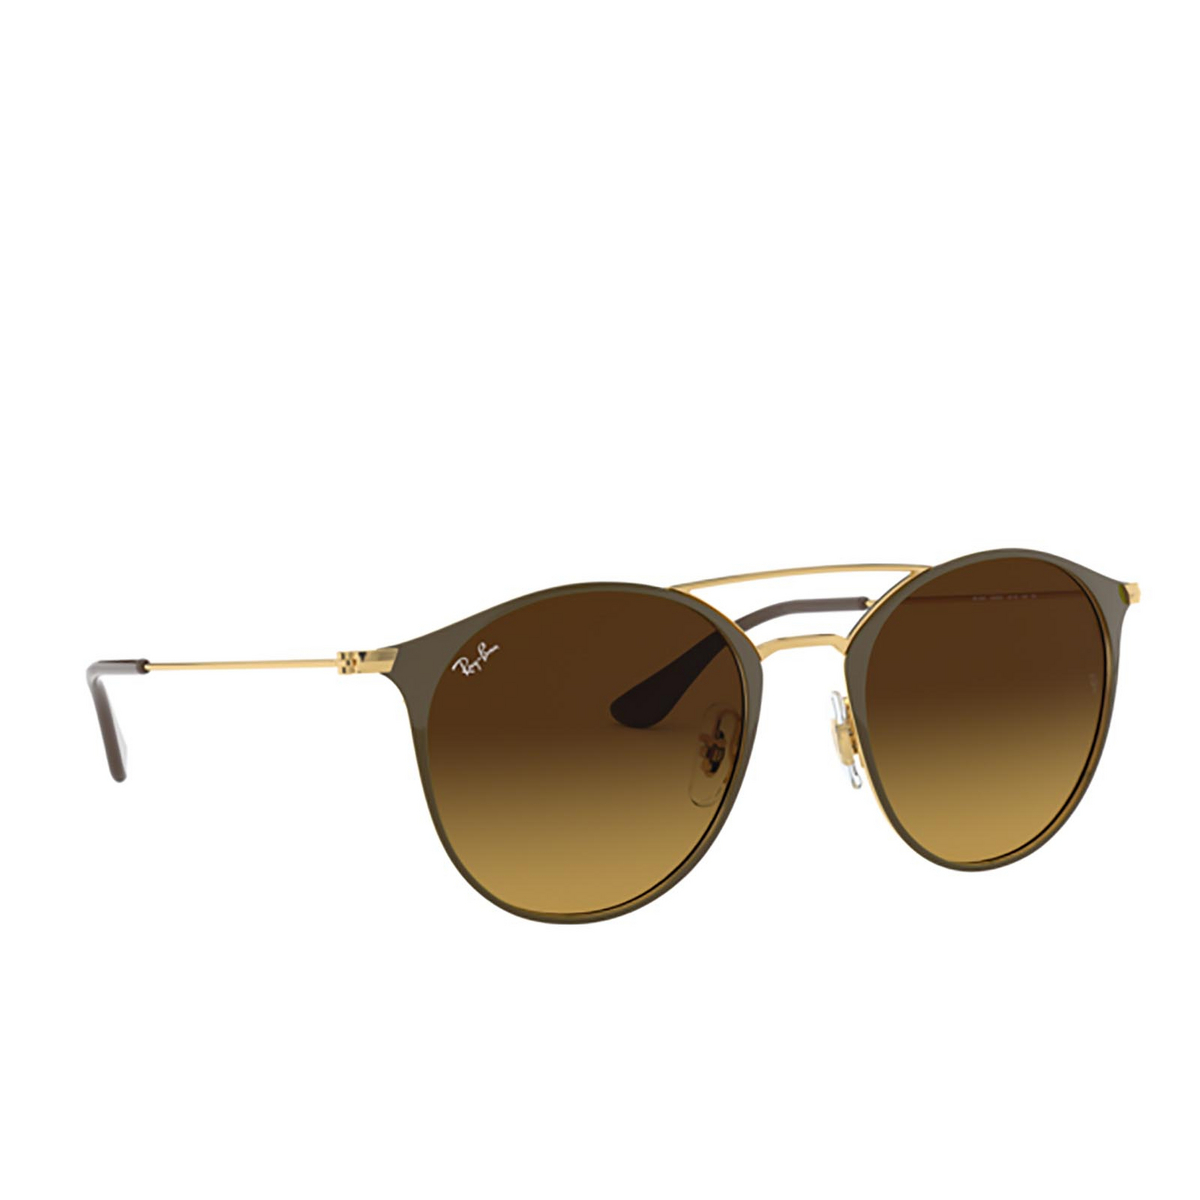 Ray-Ban RB3546 Sunglasses 900985 Gold Top Brown - three-quarters view